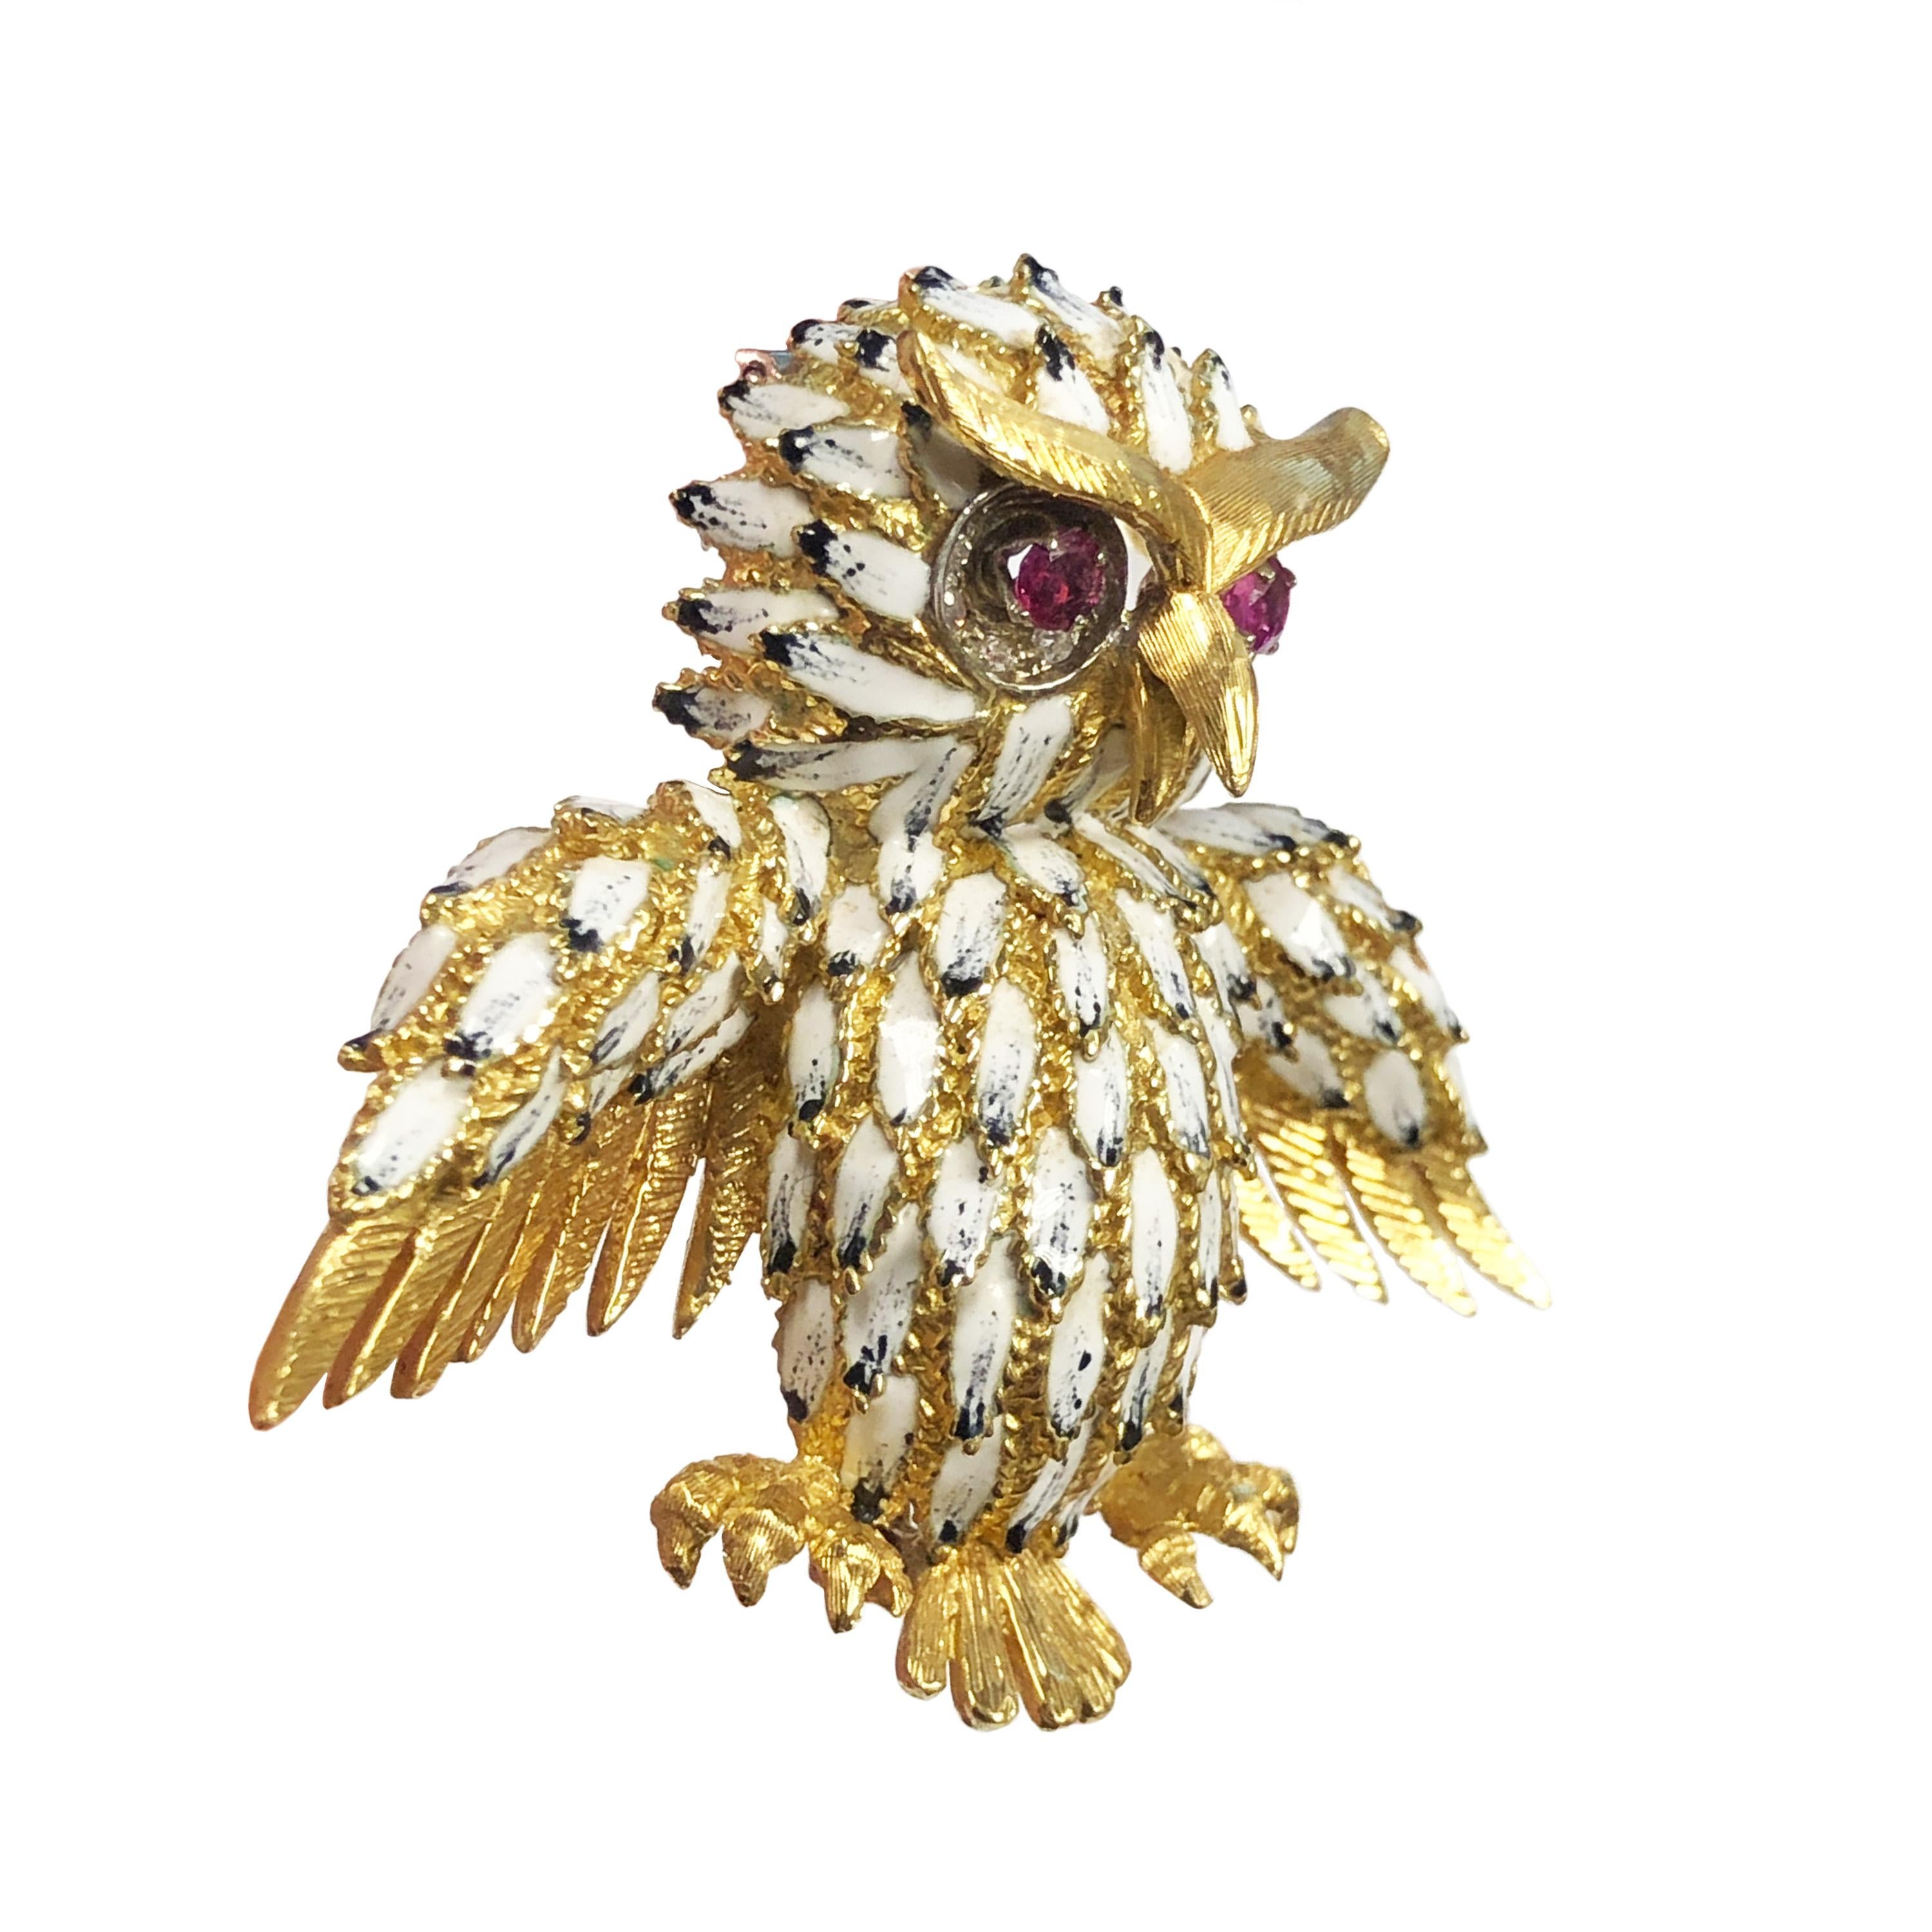 Circa 1970s 18K Yellow Gold Owl Brooch, measuring 2 1/2 inches from wing end to end, 2 inches tall and weighing 33.2 grams. Finely detailed with Hand Chased Gold work, Enamel Feathers and Ruby and Diamond set Eyes. Having a Double pin Clip fastener. 